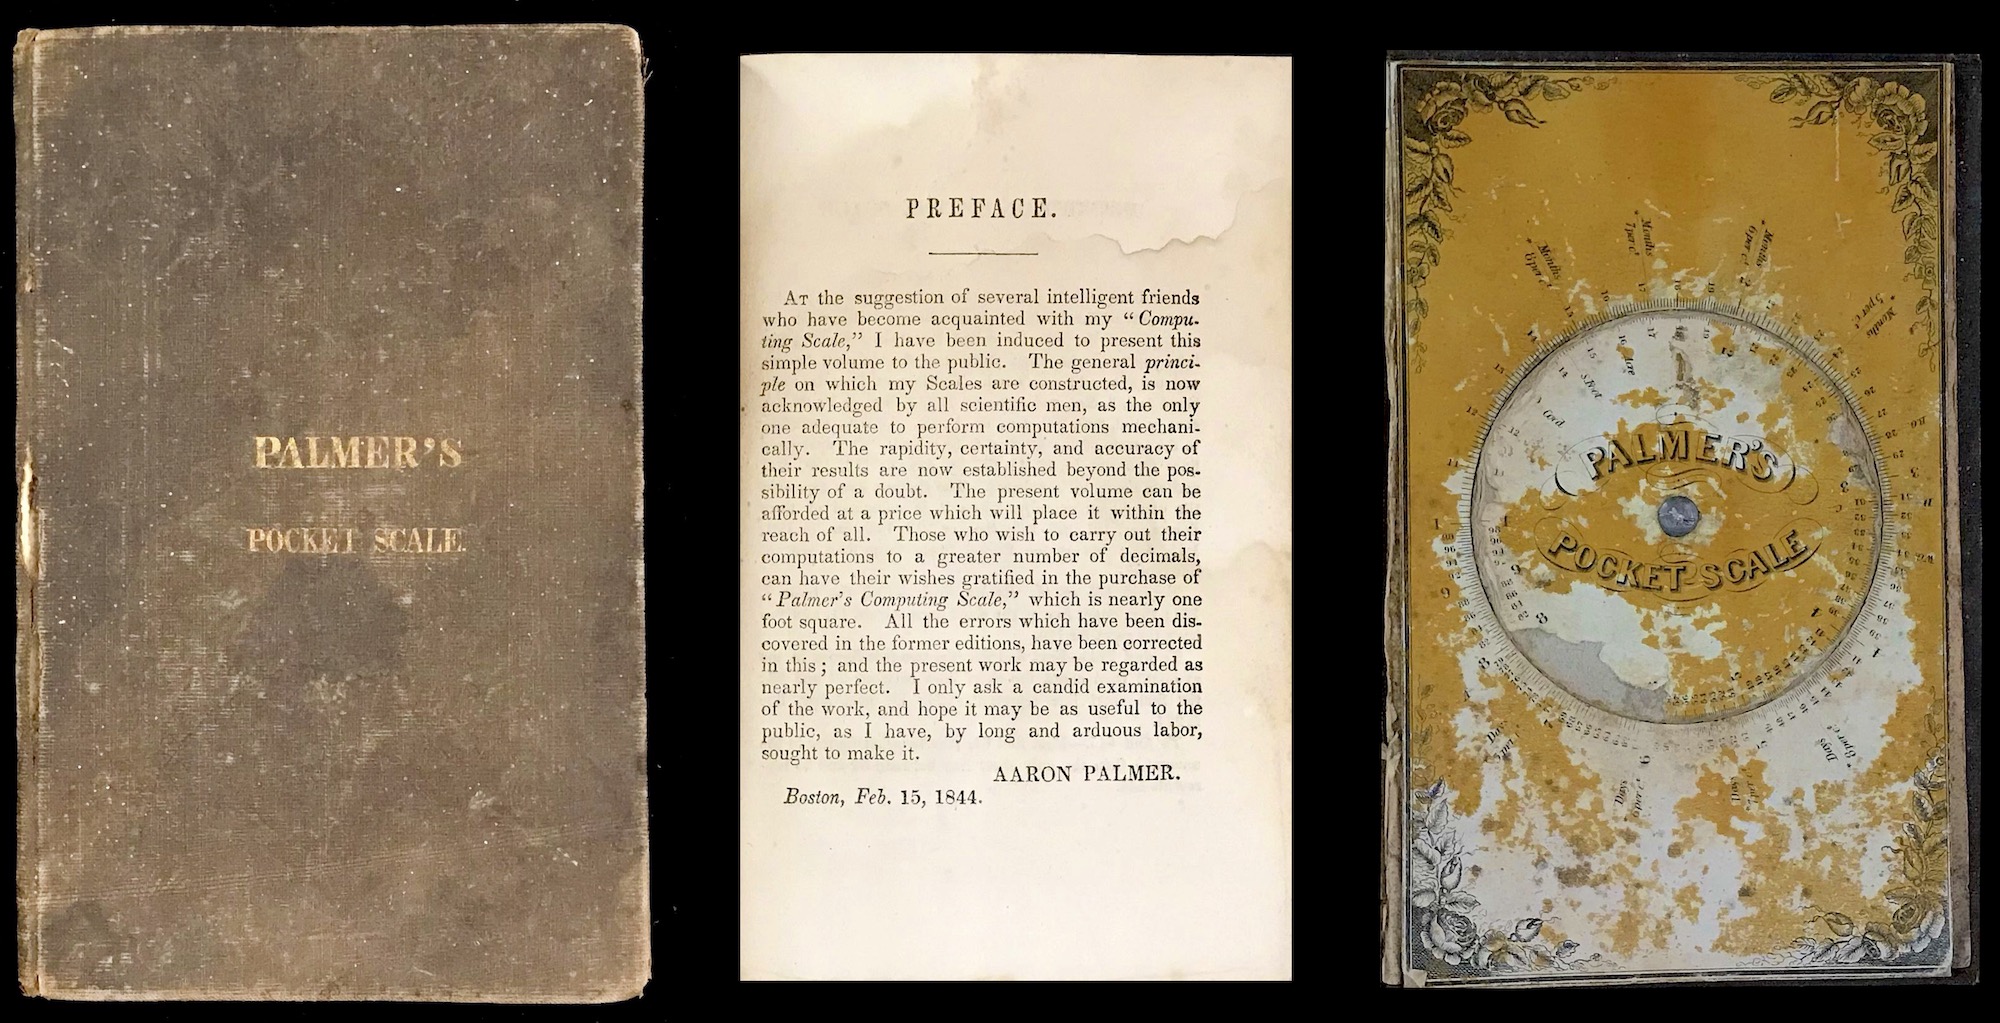 An 1845 version of Palmer’s Pocket Scale, a 48-page instruction booklet. Left-to-Right are the cover, the Preface, and the 3-inch-diameter slide rule inside the back cover.